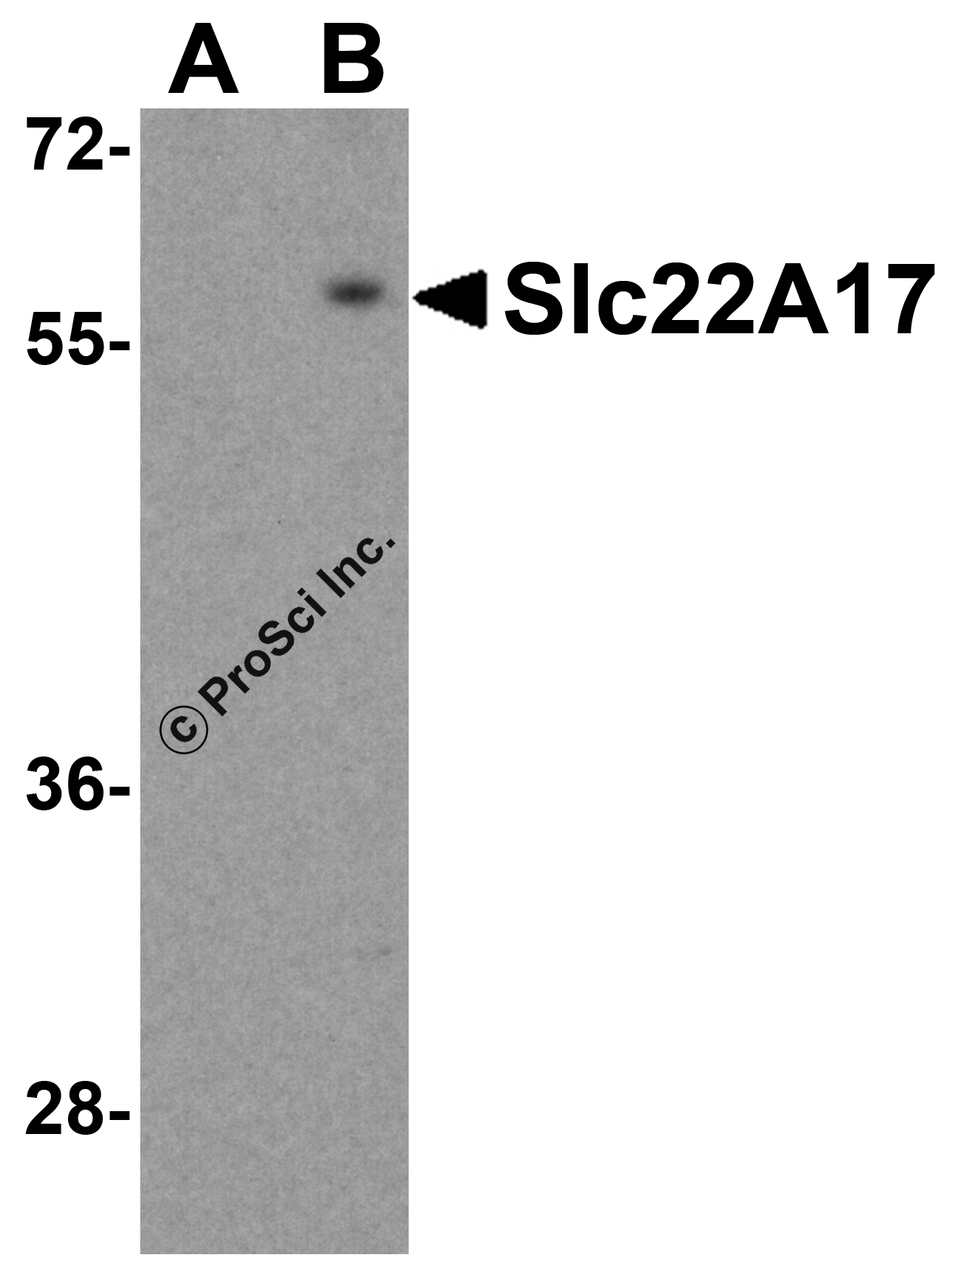 Western blot analysis of Slc22A17 in SK-N-SH lysate with Slc22A17 antibody at 0.5 &#956;g/mL in (A) the presence and (B) the absence of blocking peptide.